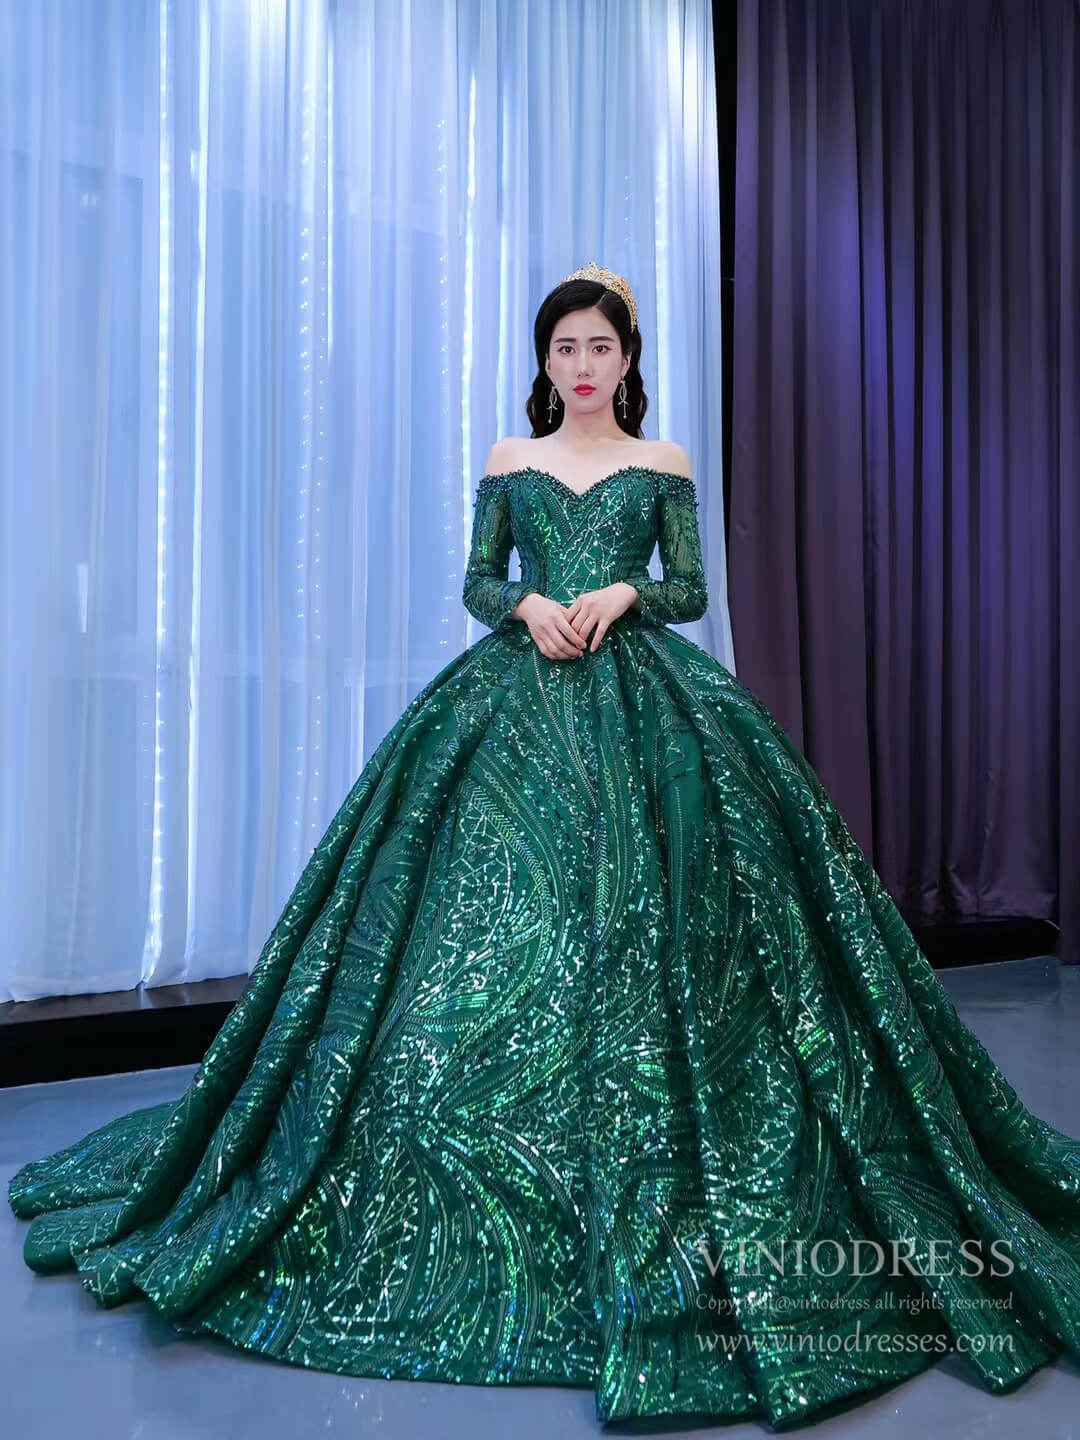 Forest Green Gown - Dress for the Wedding